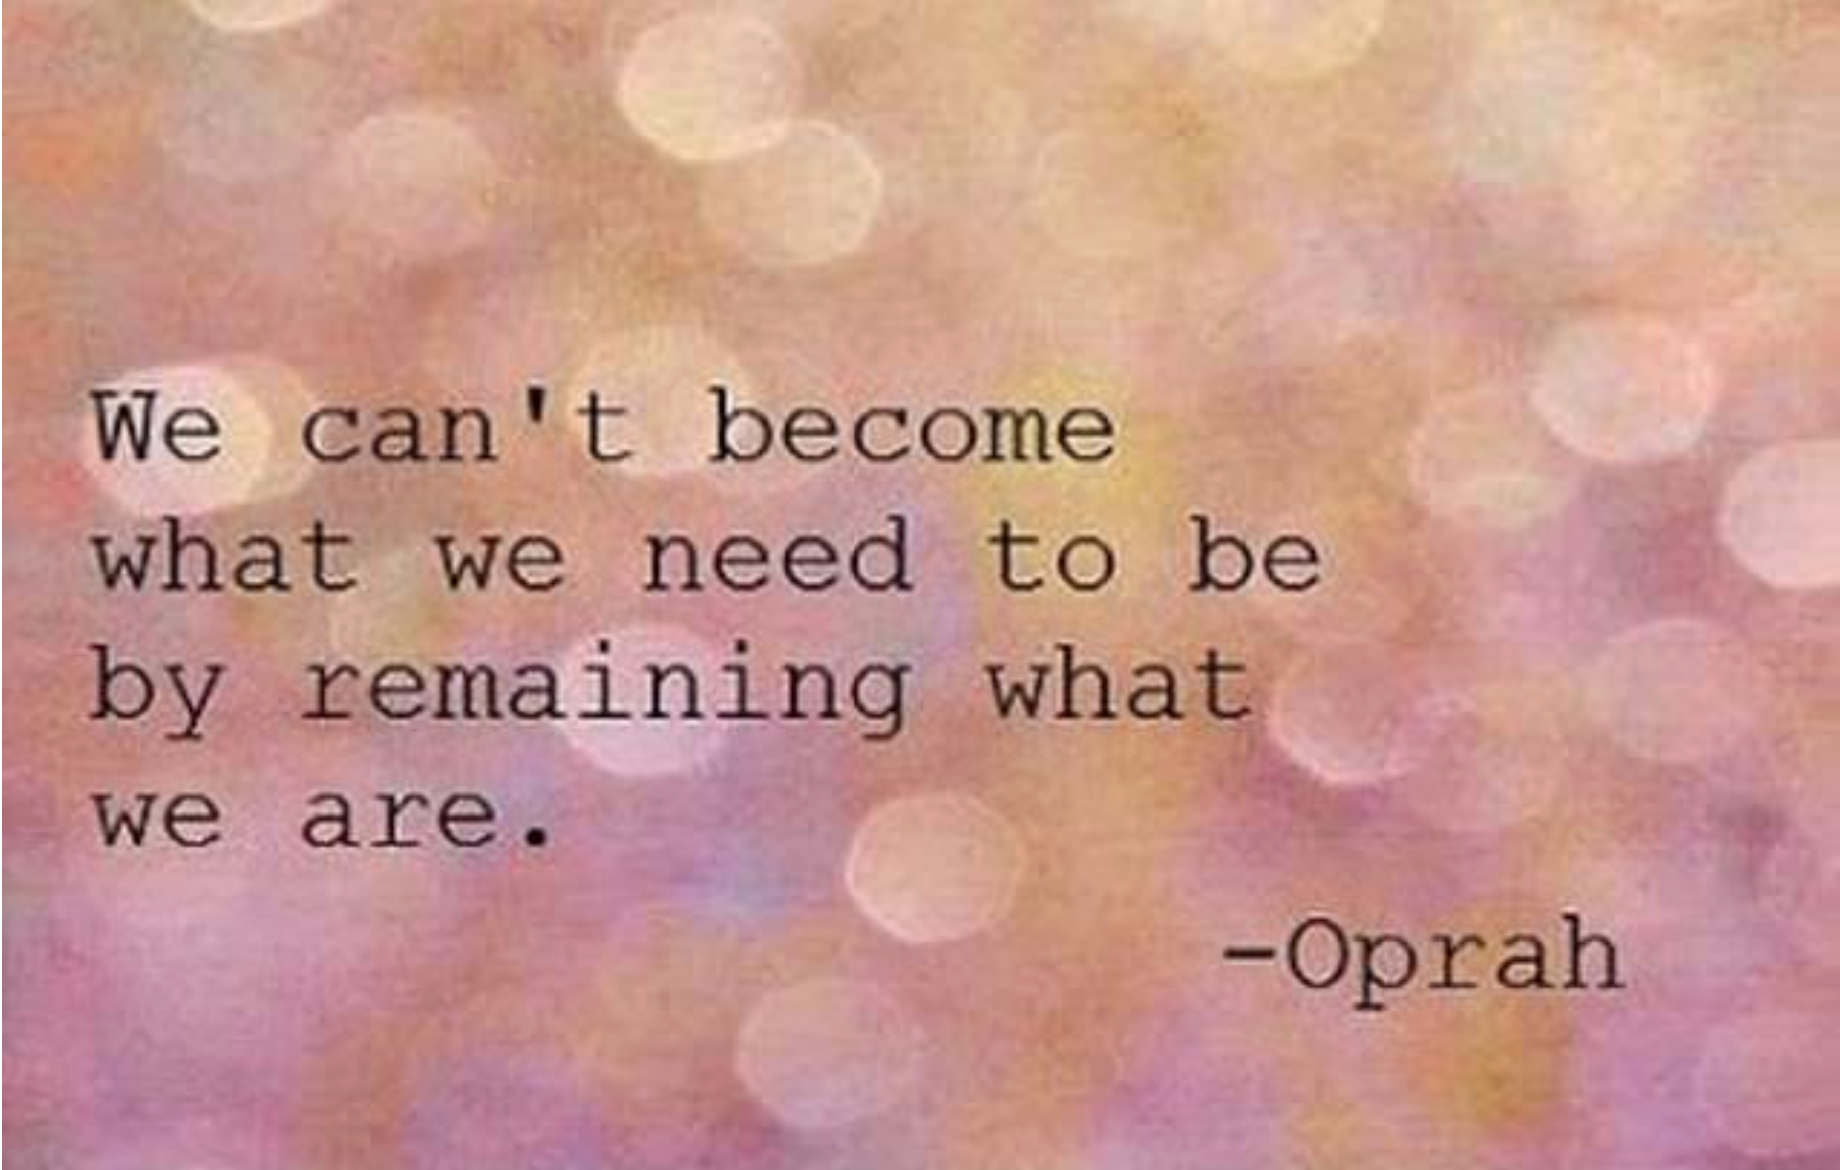 Oprah quote - Living Fit Lifestyle